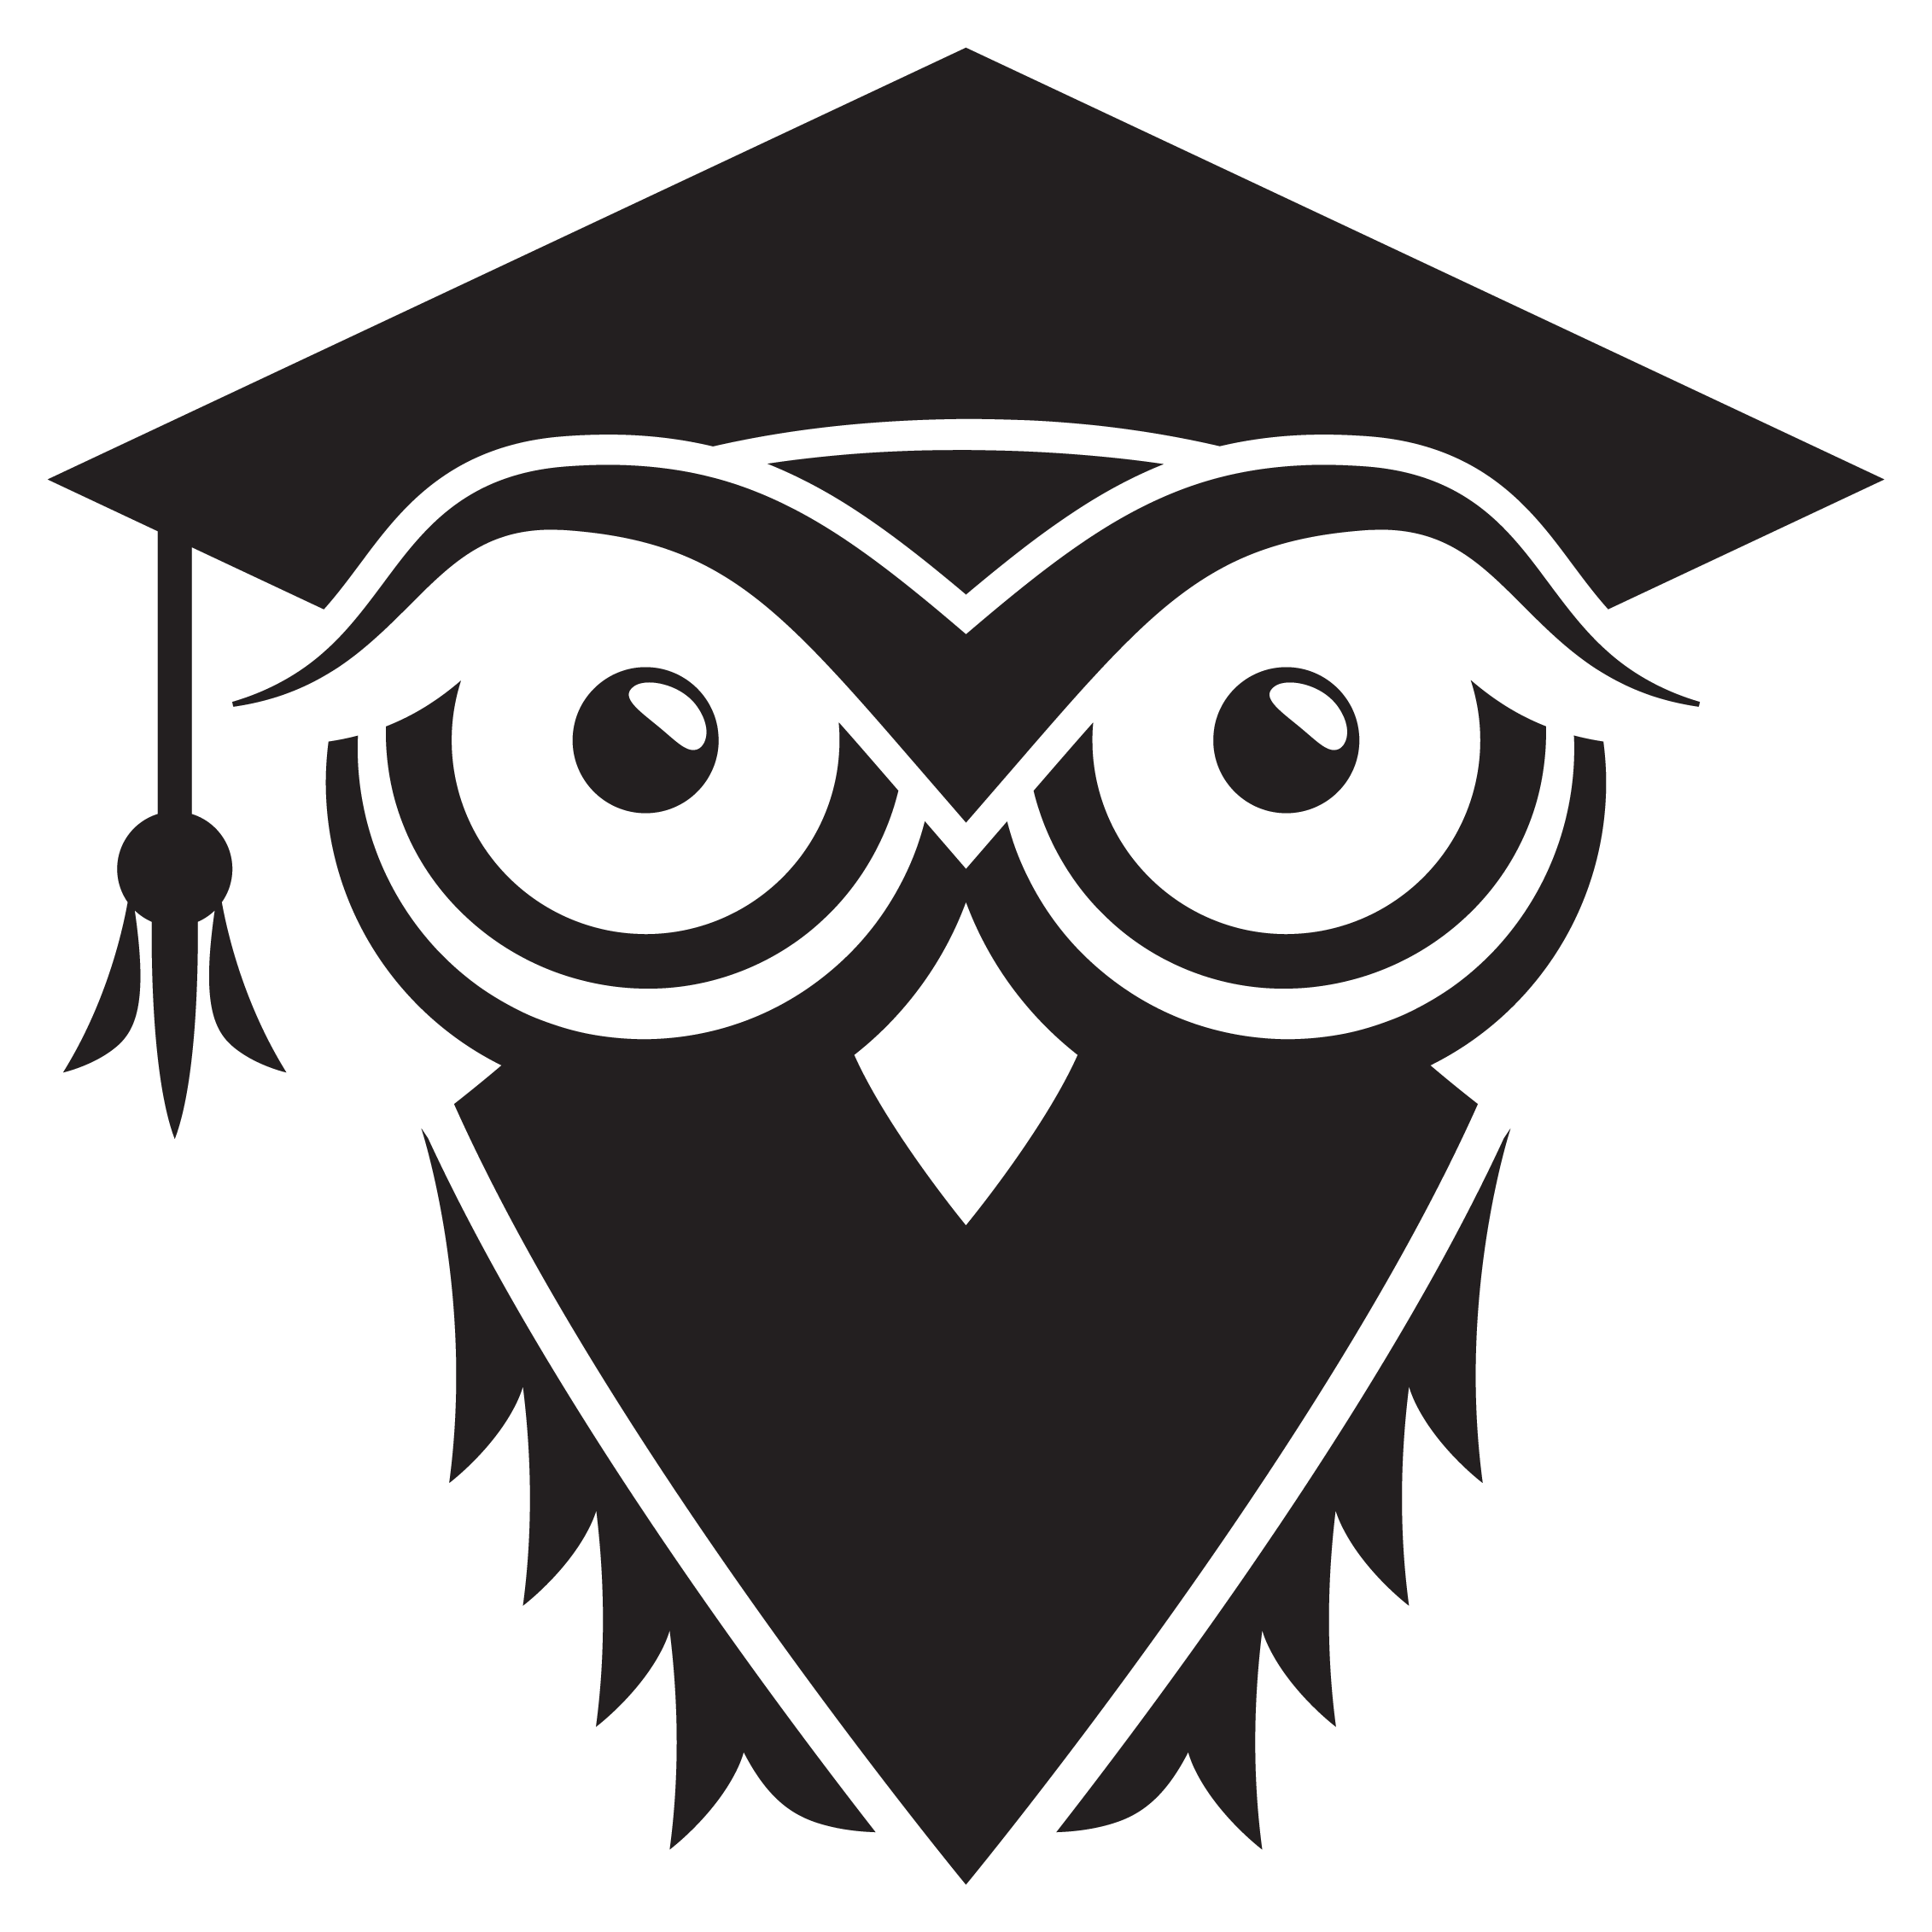 Black And White Illustration Of An Owl Wearing A Mortarboard - Square Academic Cap (2263x2263)